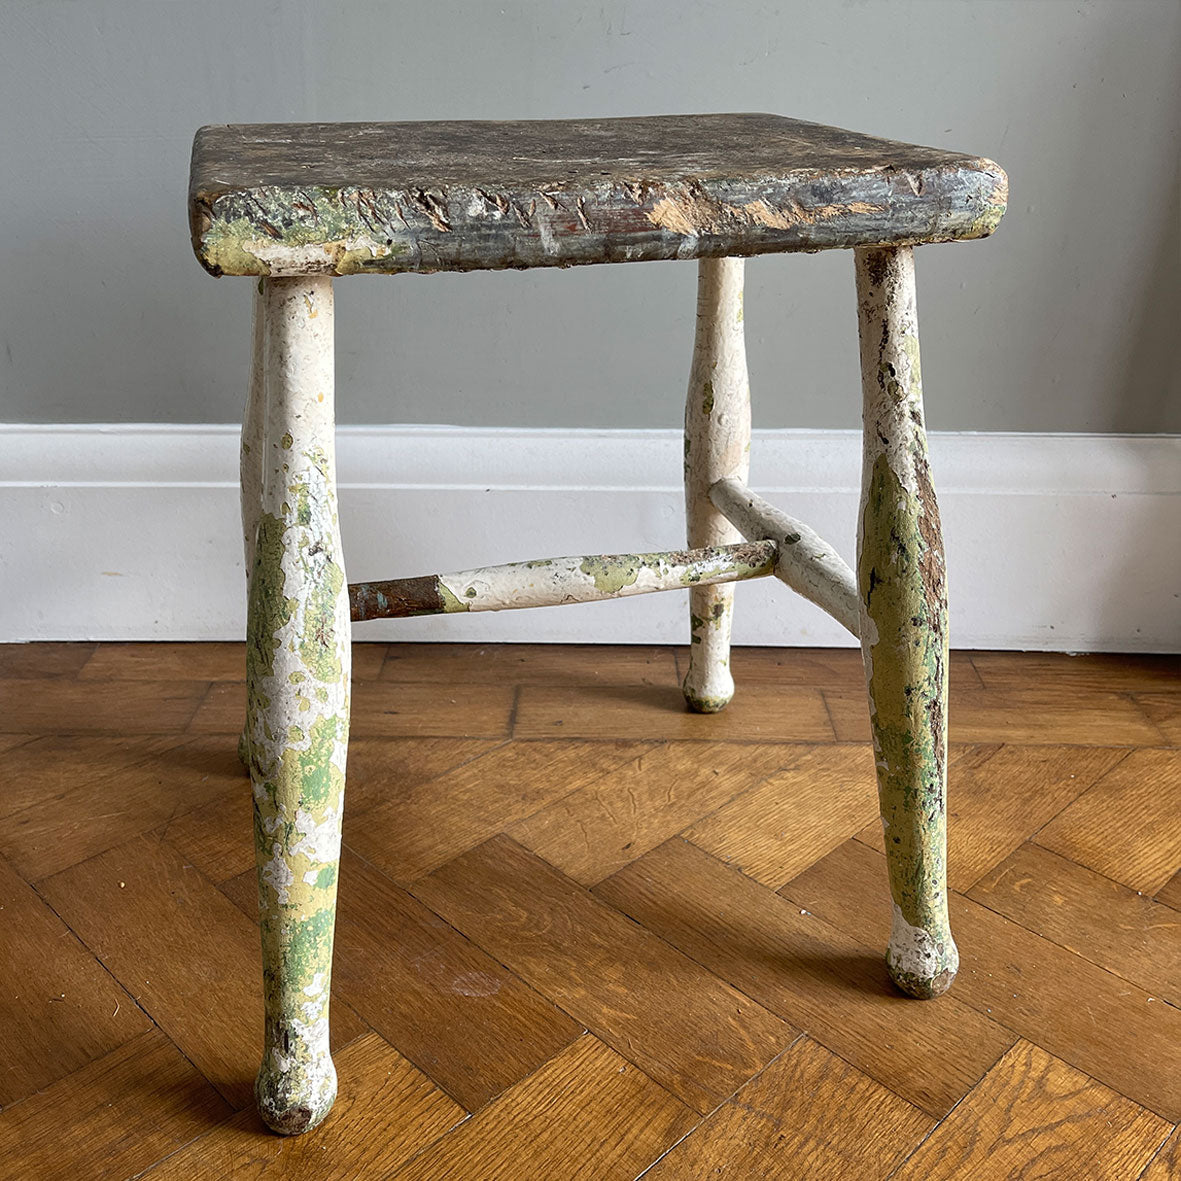 Good looking Vintage Painted Stool. Fantastic age age related wear and patina yet still totally solid. The green paint has worn and chipped away giving the stool that bang on look - SHOP NOW - www.intovintage.co.uk